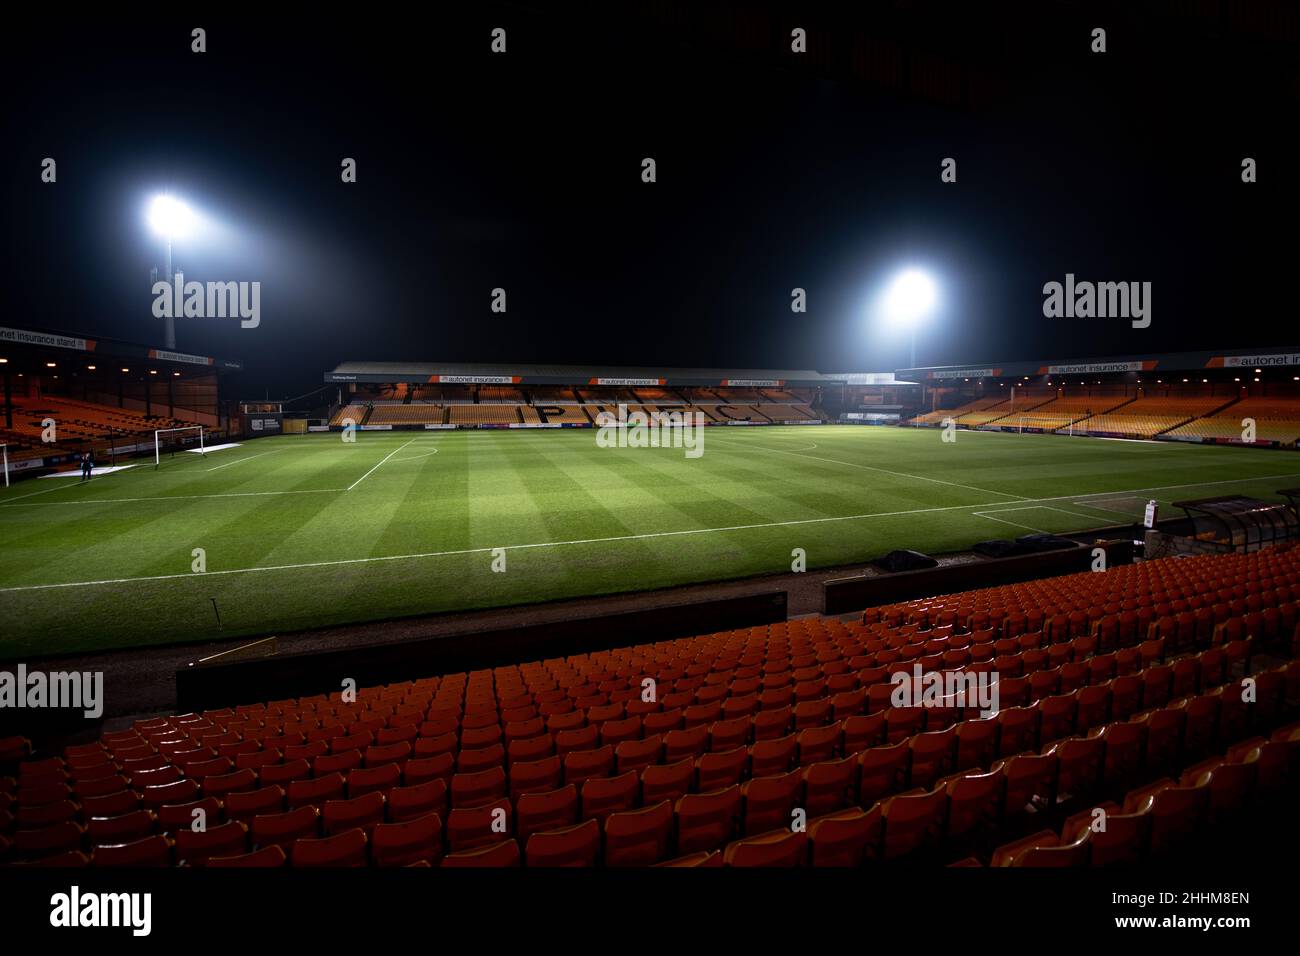 Vale Park football stadium in Stoke-on-Trent, England. Home ground of Port Vale F.C. since 1950 Stock Photo